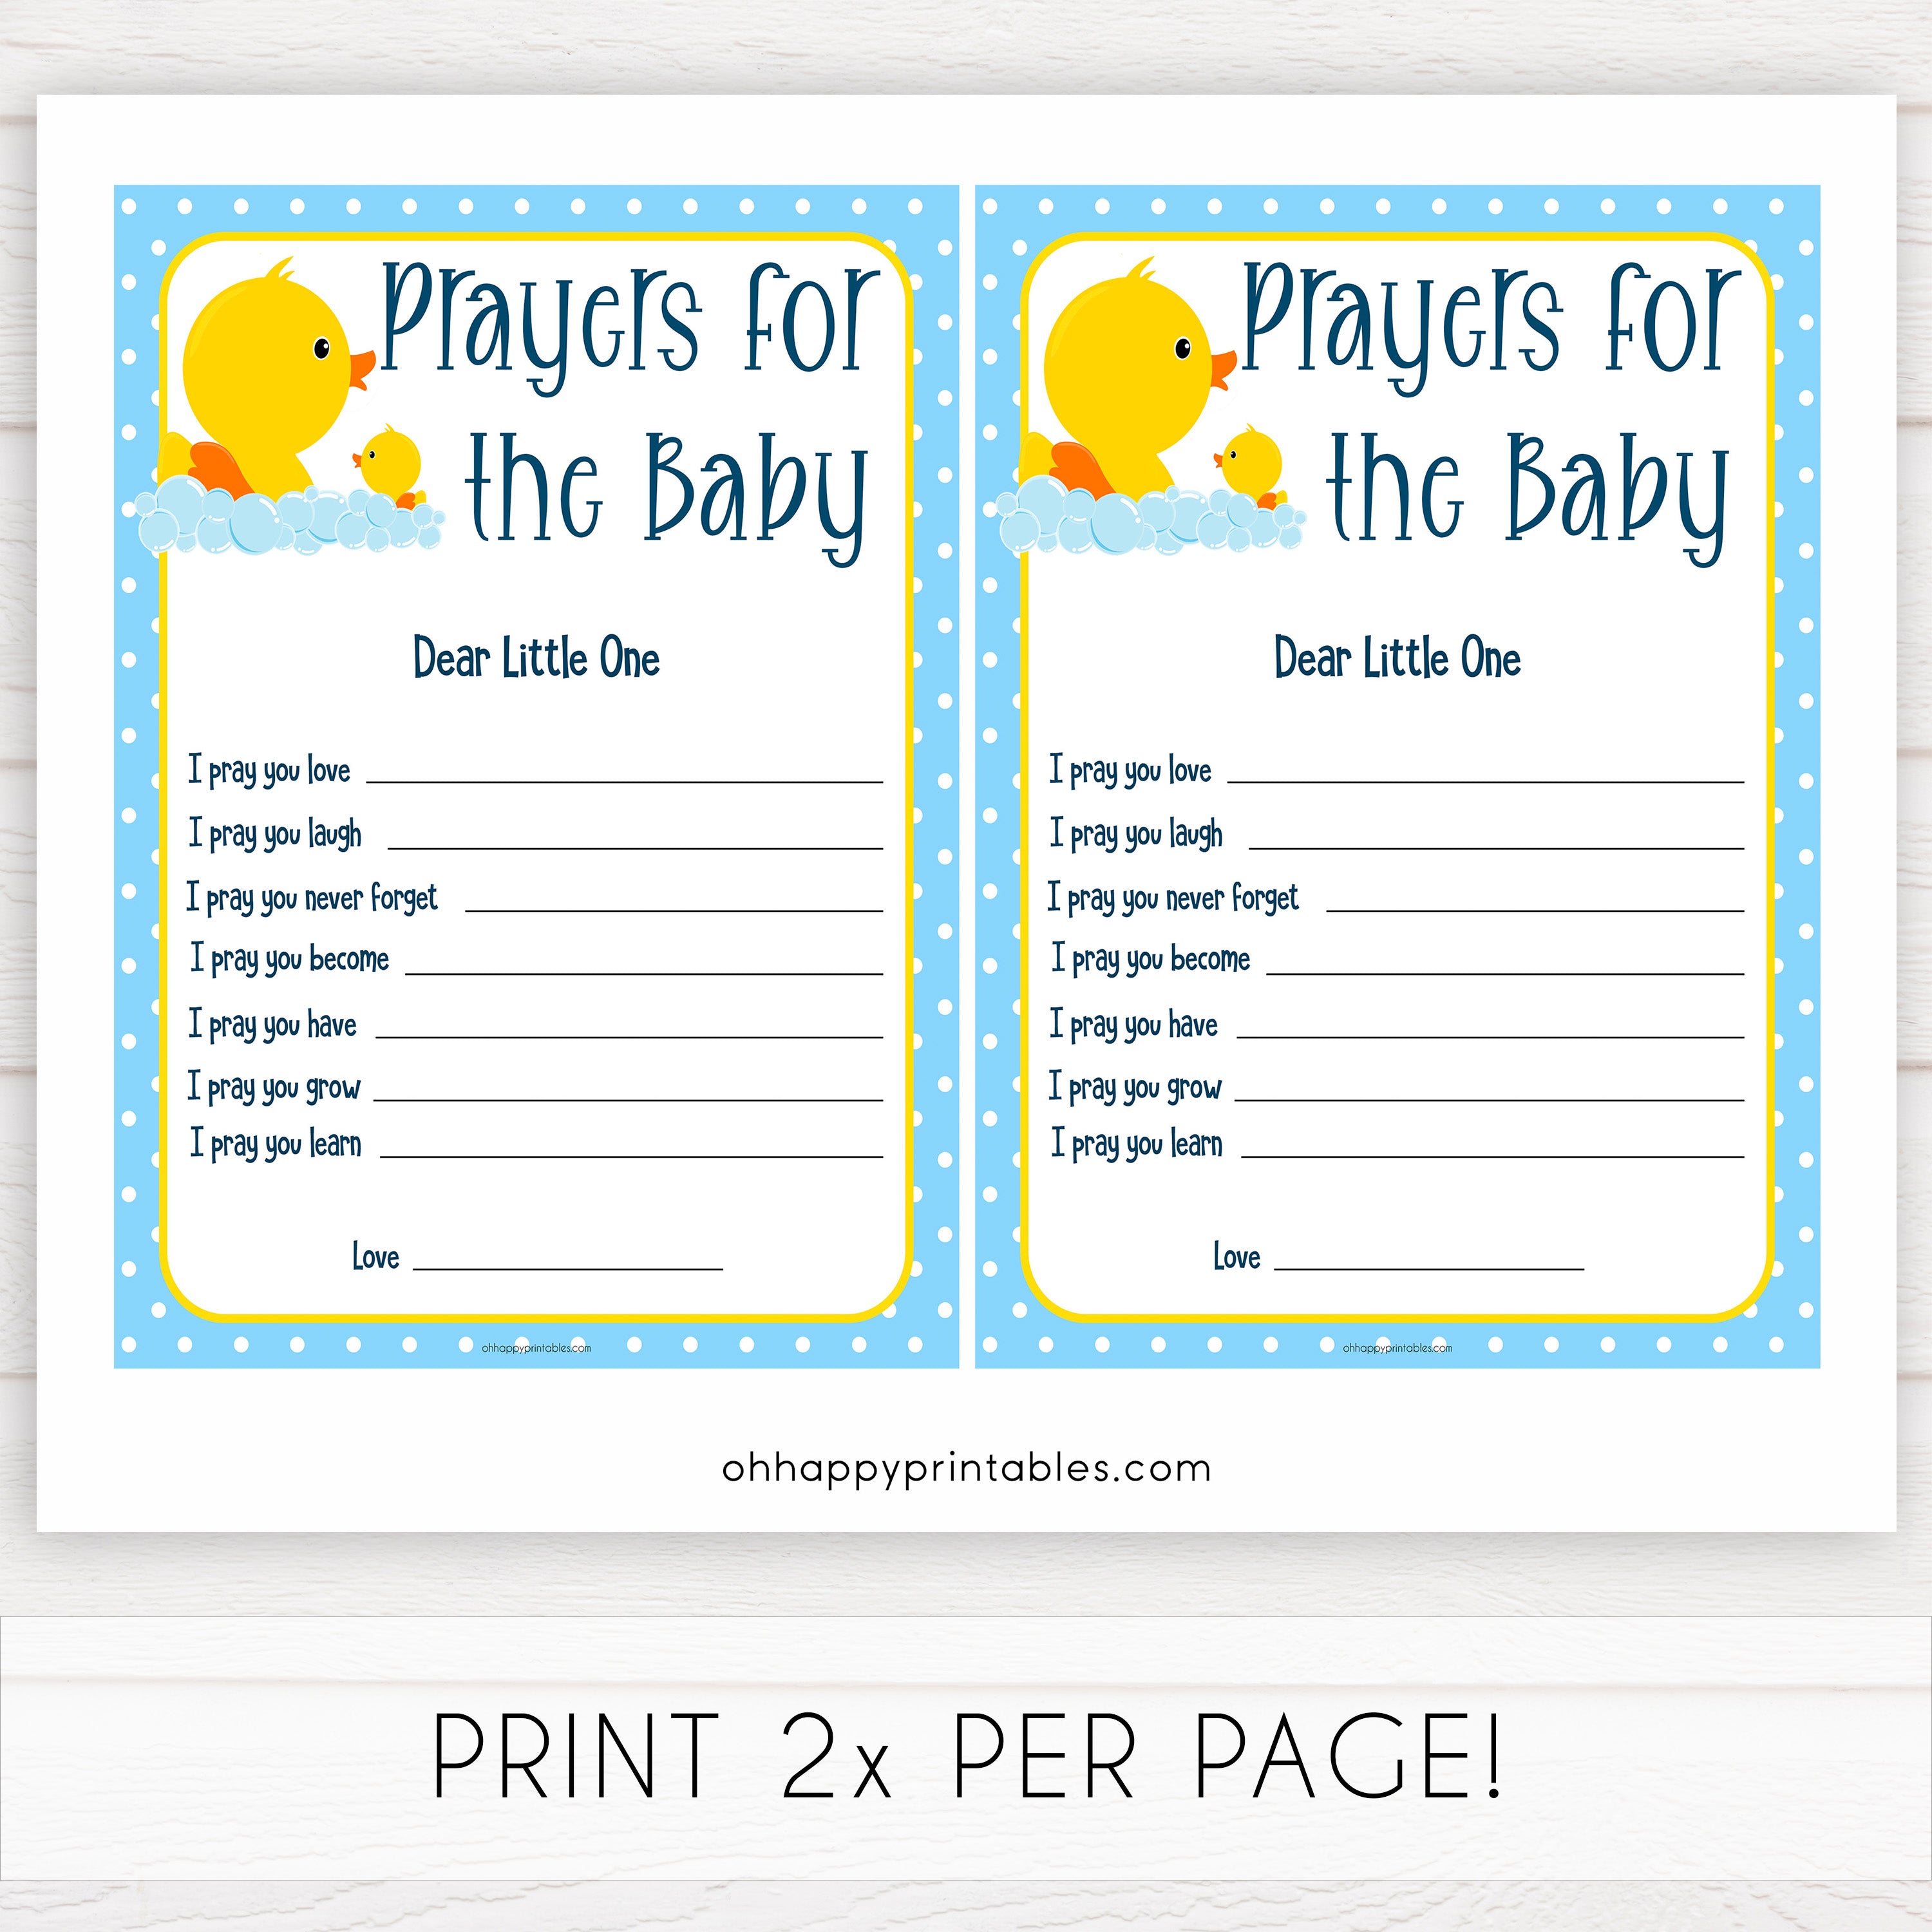 rubber ducky baby games, prayers for baby baby game, printable baby games, baby shower games, rubber ducky baby theme, fun baby games, popular baby games